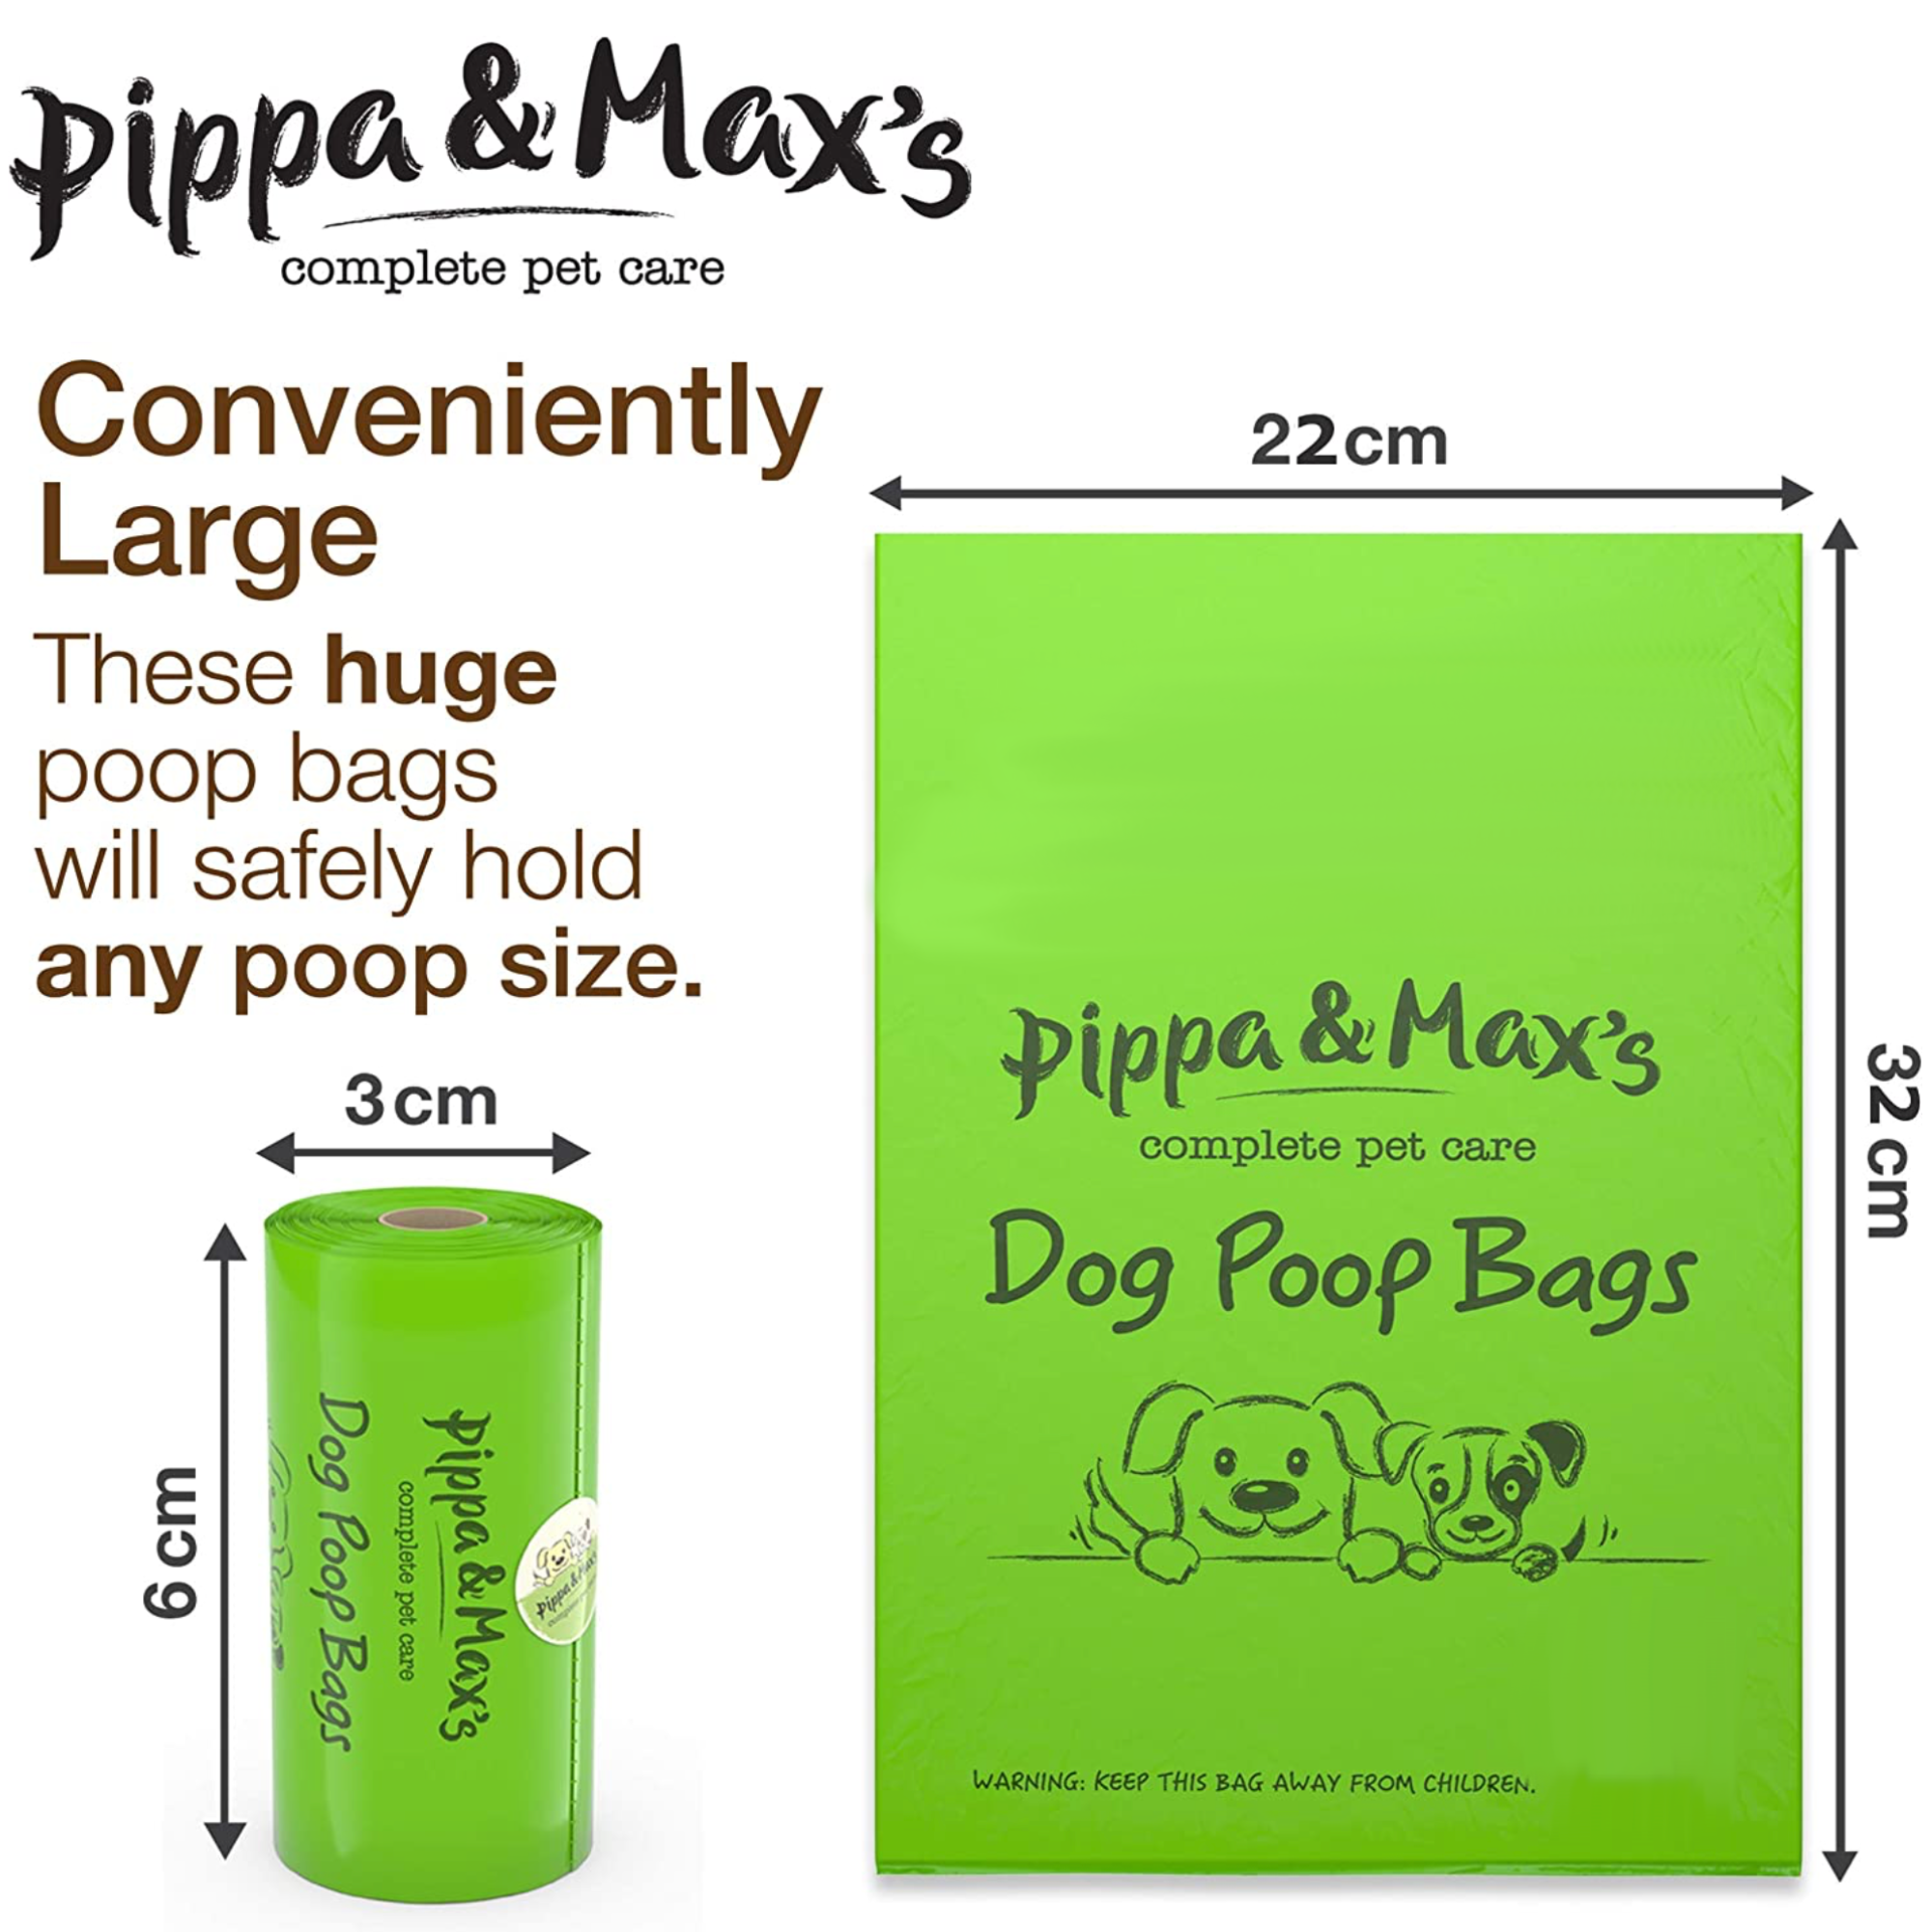 Pippa & Max's Extra Strong Dog Walking Poop Bags - Thick and Durable (450) for Hassle-free Cleanups